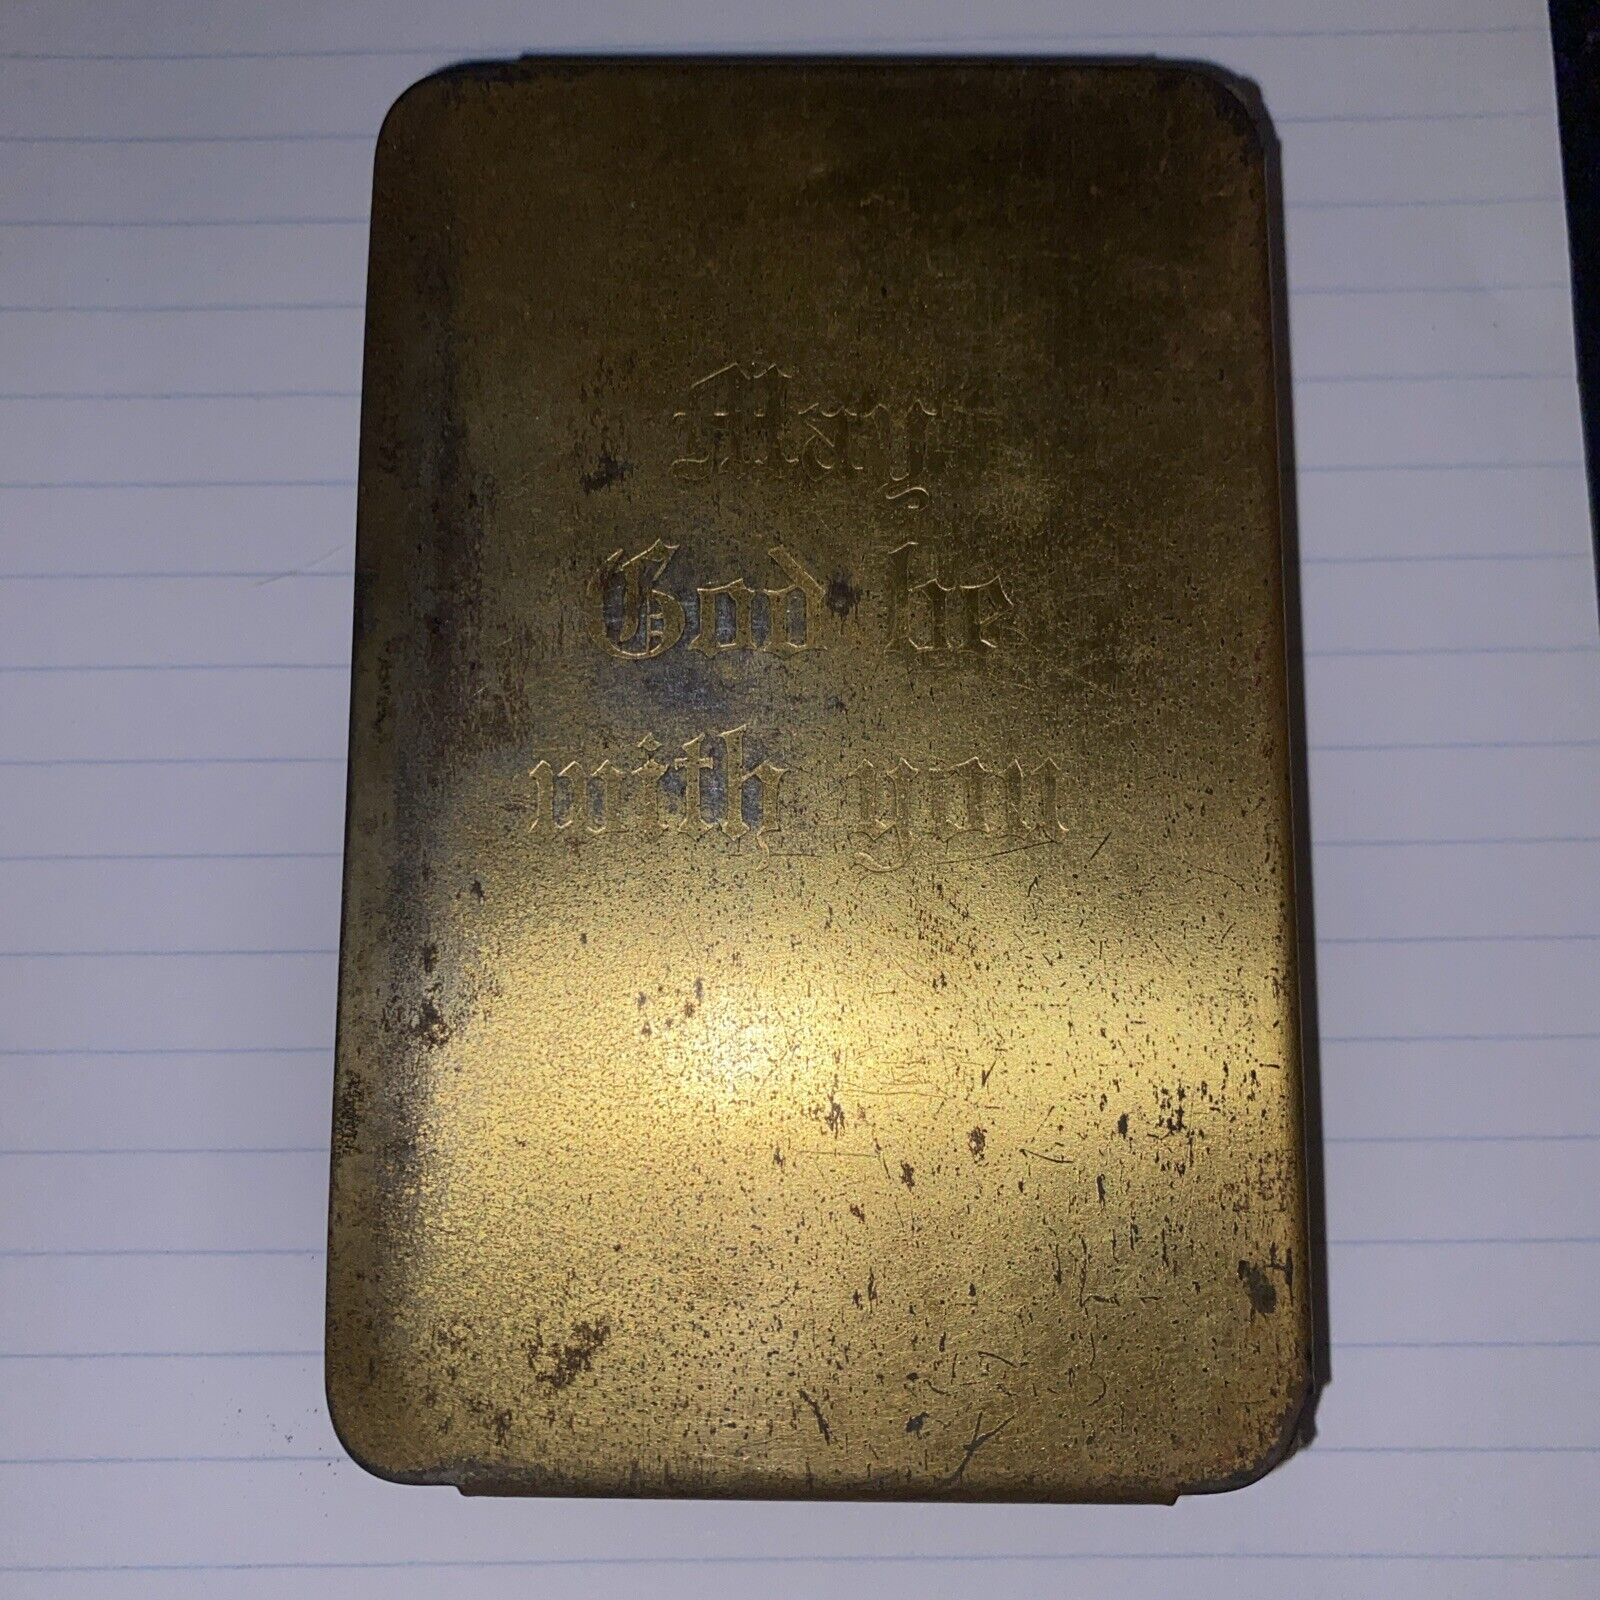 Antique/Vintage WWII Metal Cover Heart Shield Soldiers Pocket Bible.